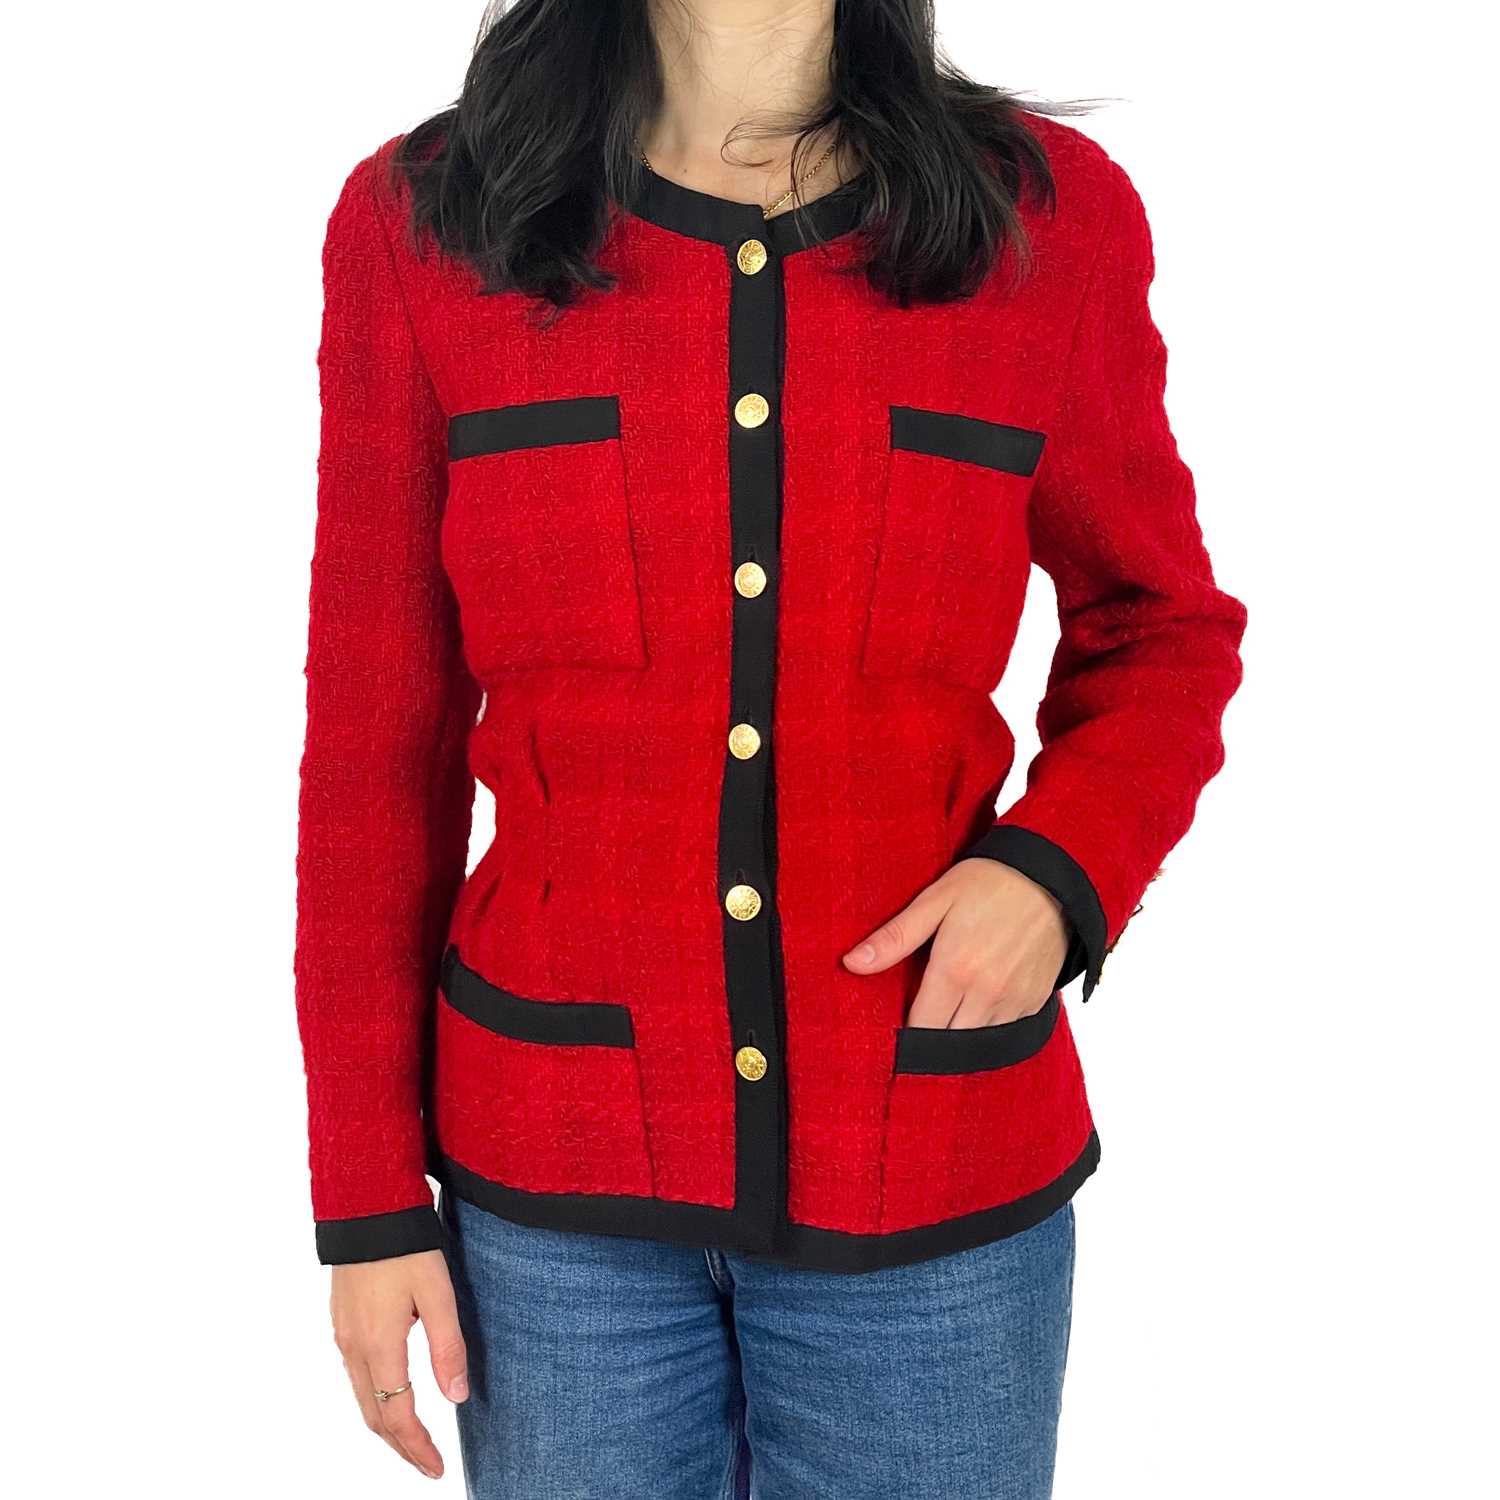 A Chanel 1980's red boucle jacket with gold plated buttons and black trim.